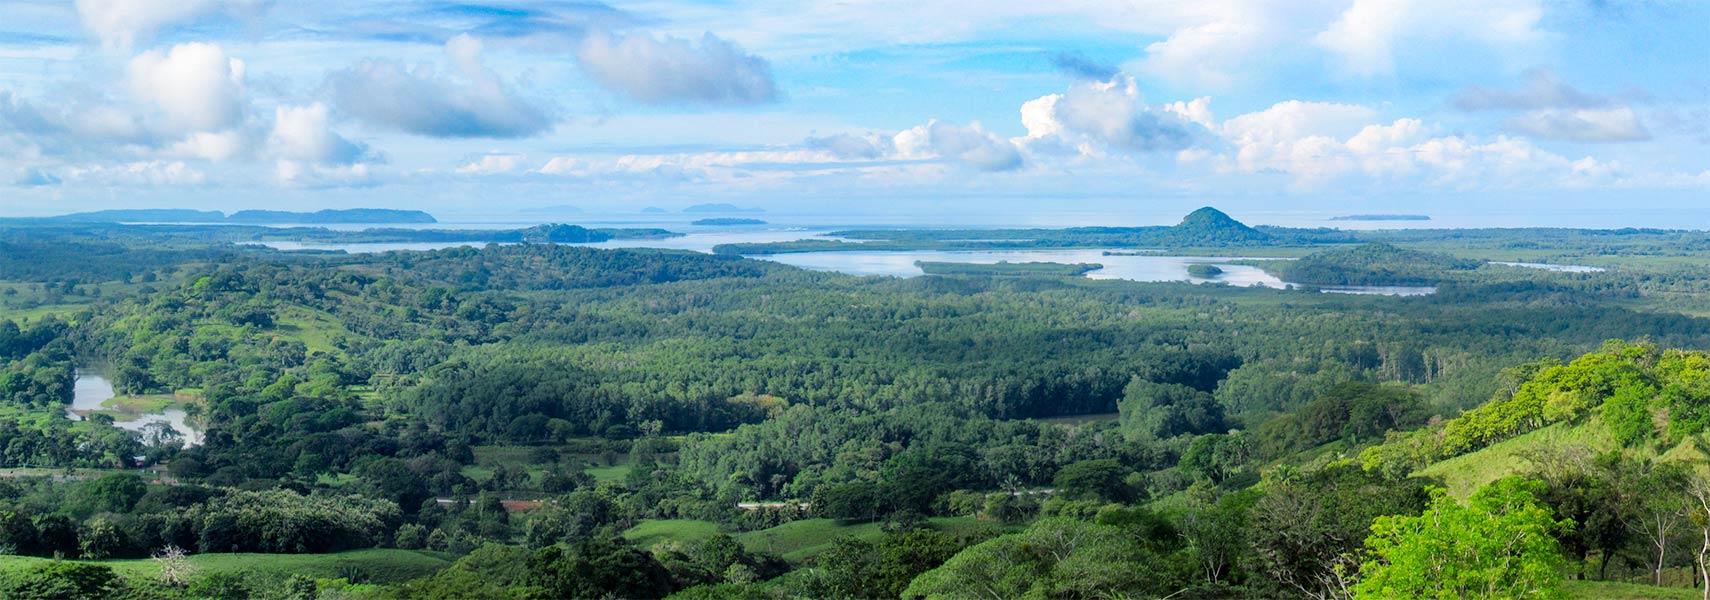 Panorama of Remedios and Tolé Districts in Chiriquí Province